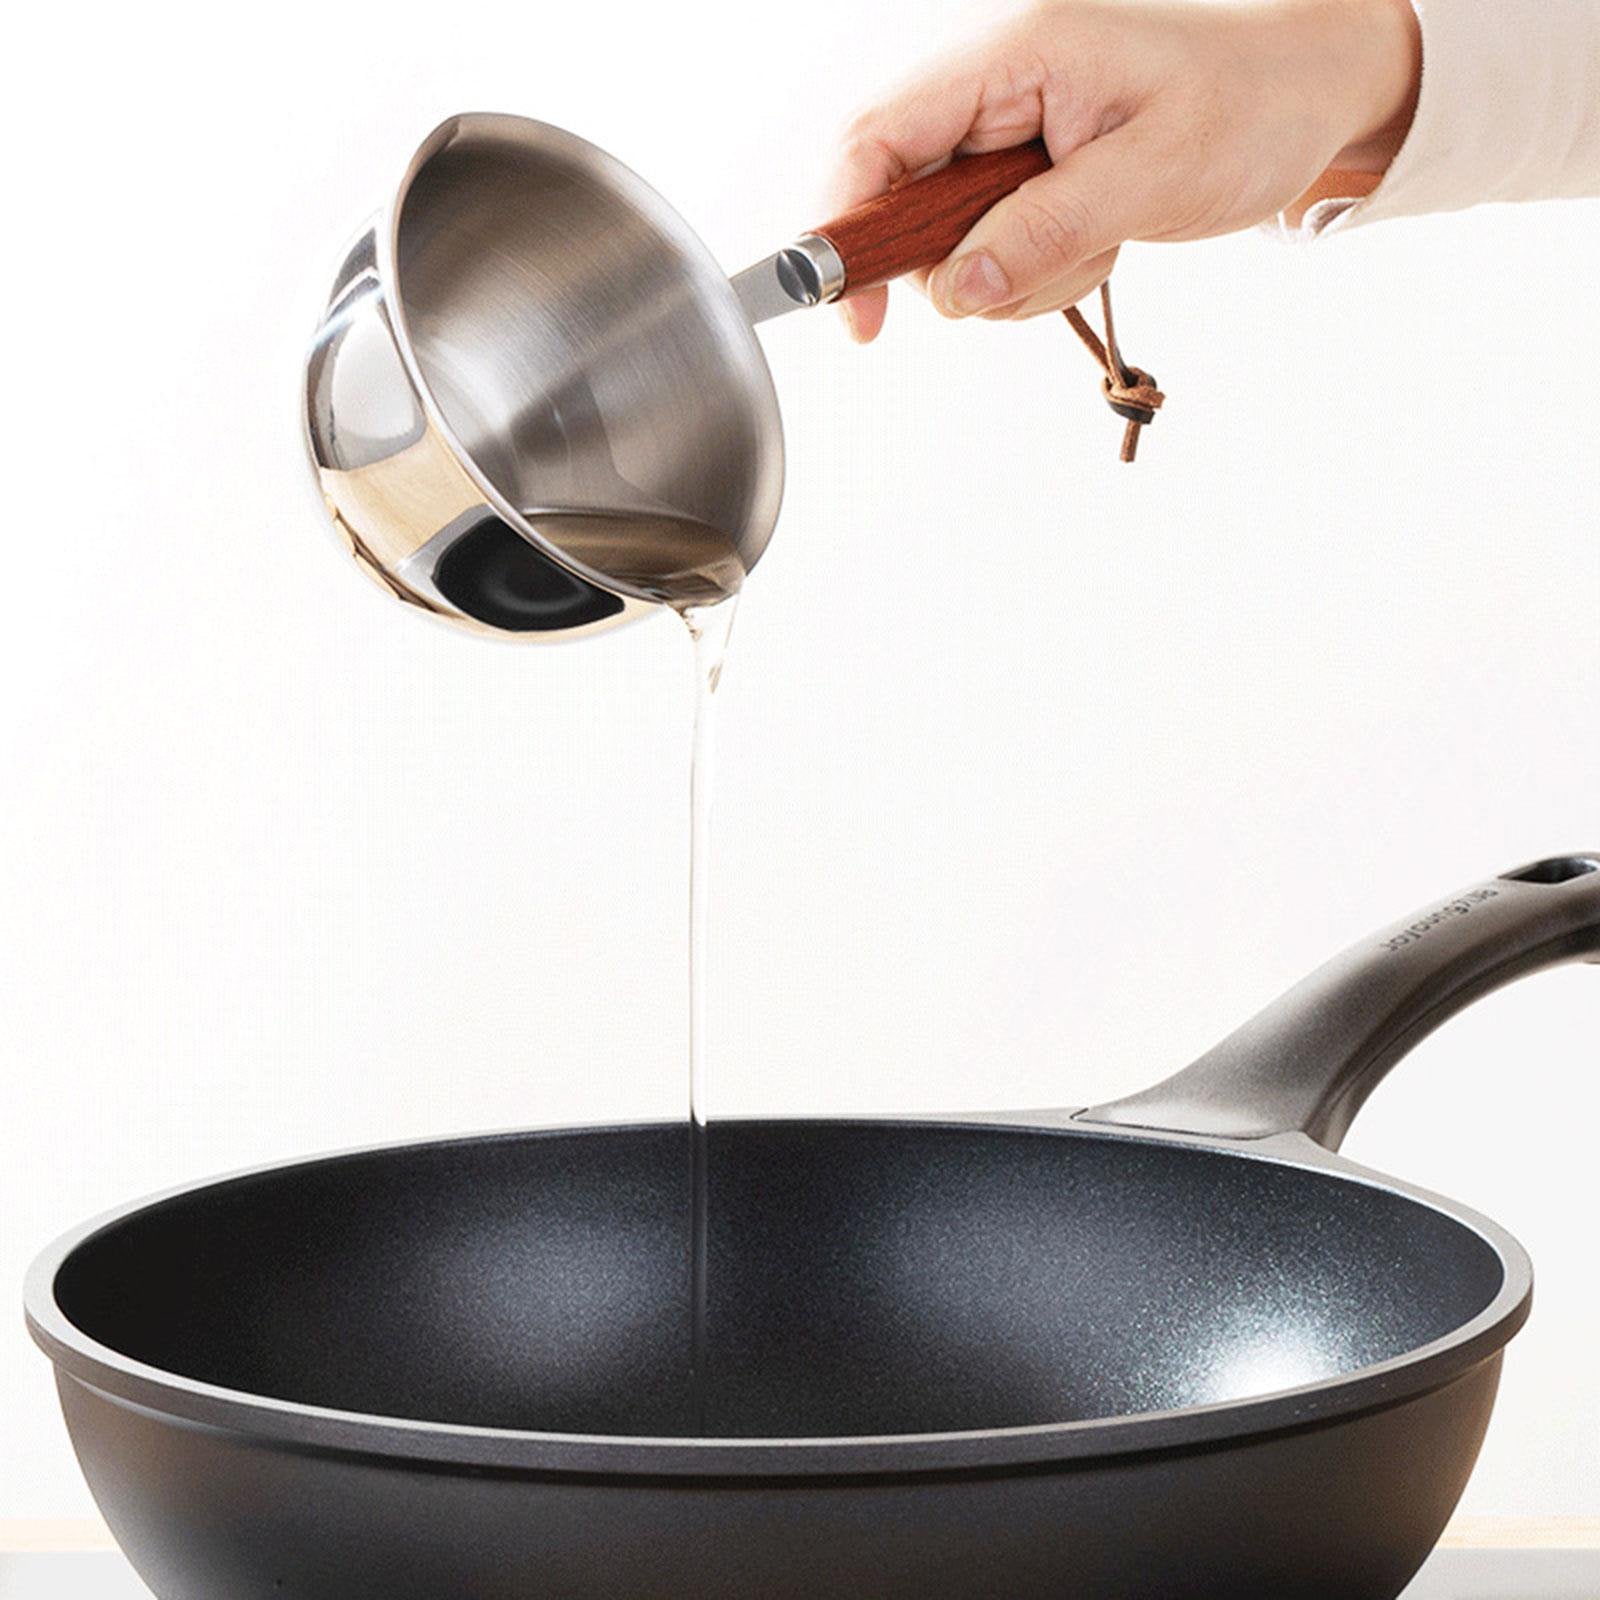 New Stainless Steel Small Cooking Pot with Dual Pour Spout Hot Oil